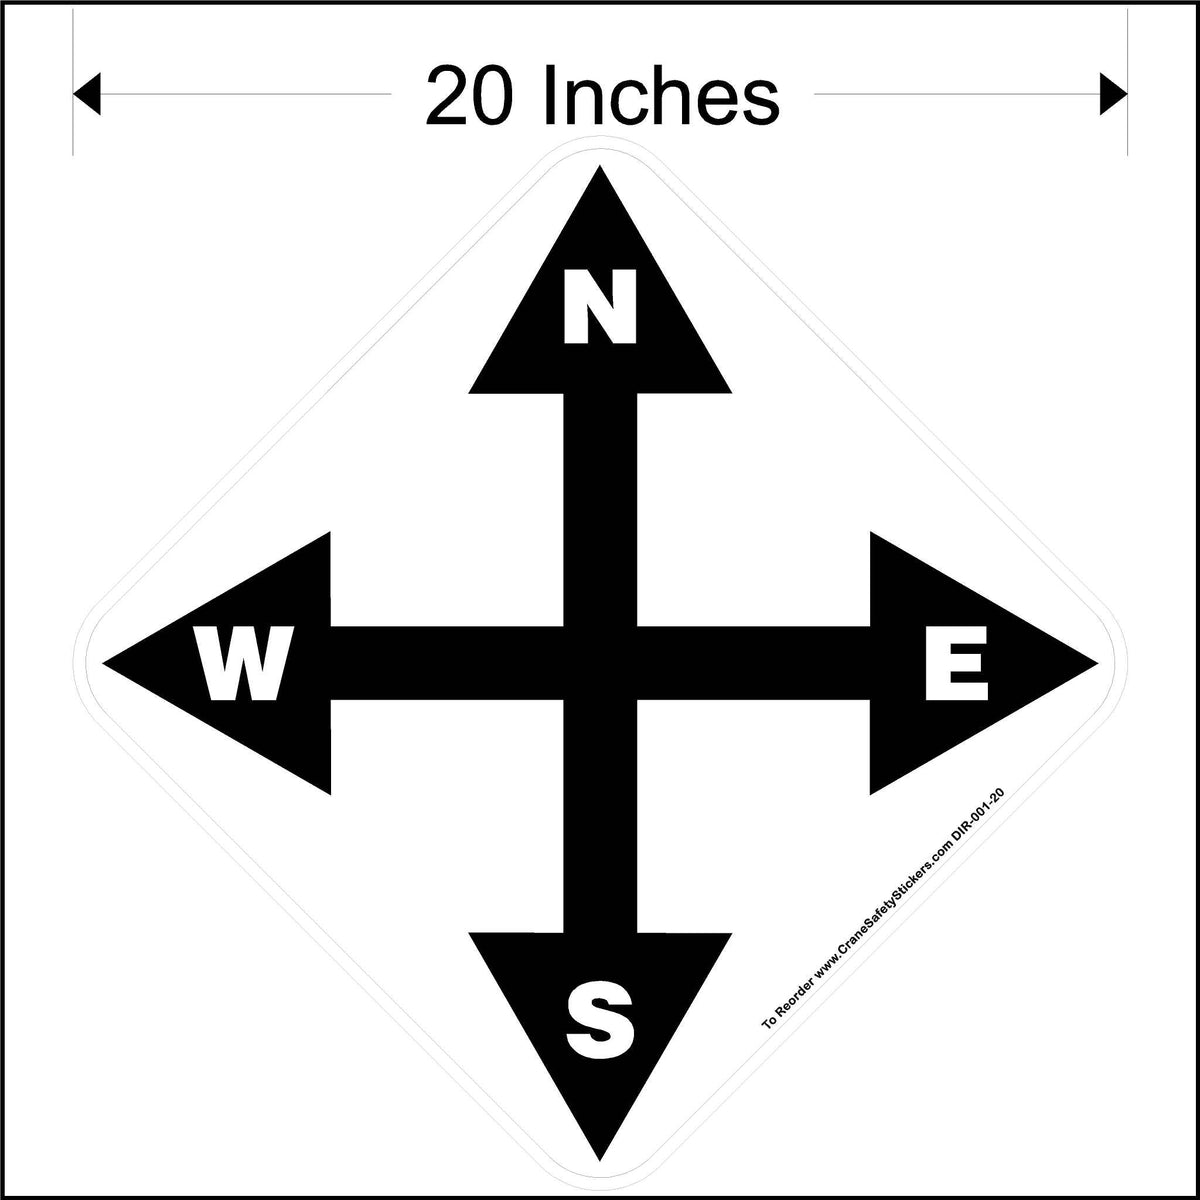 20 Inch North South East West Overhead Crane Directional Decal.